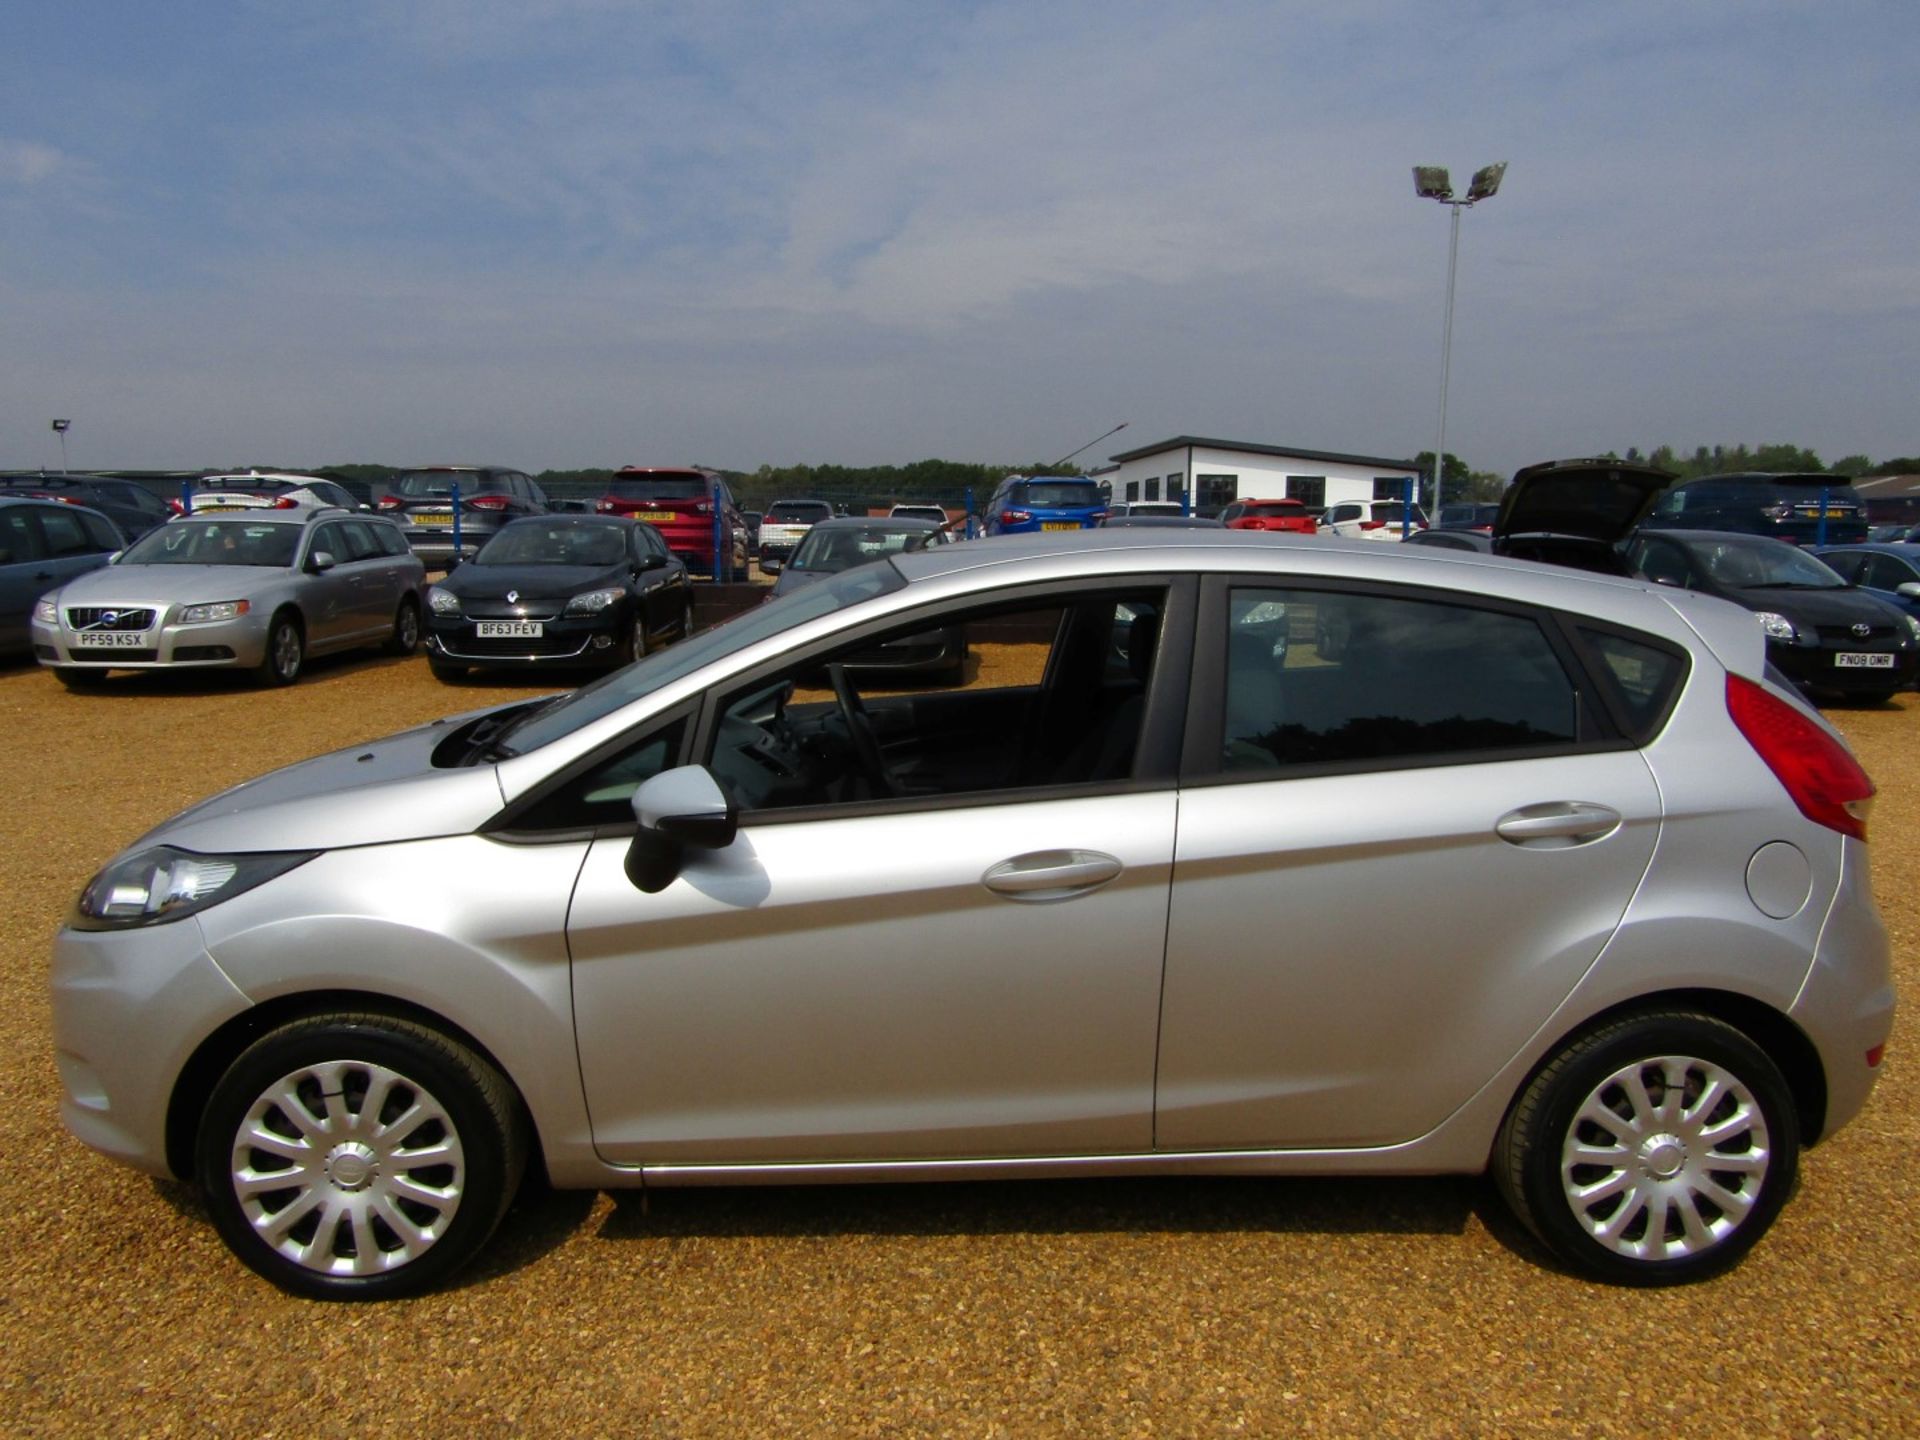 59 09 Ford Fiesta Style 82 - Image 18 of 18